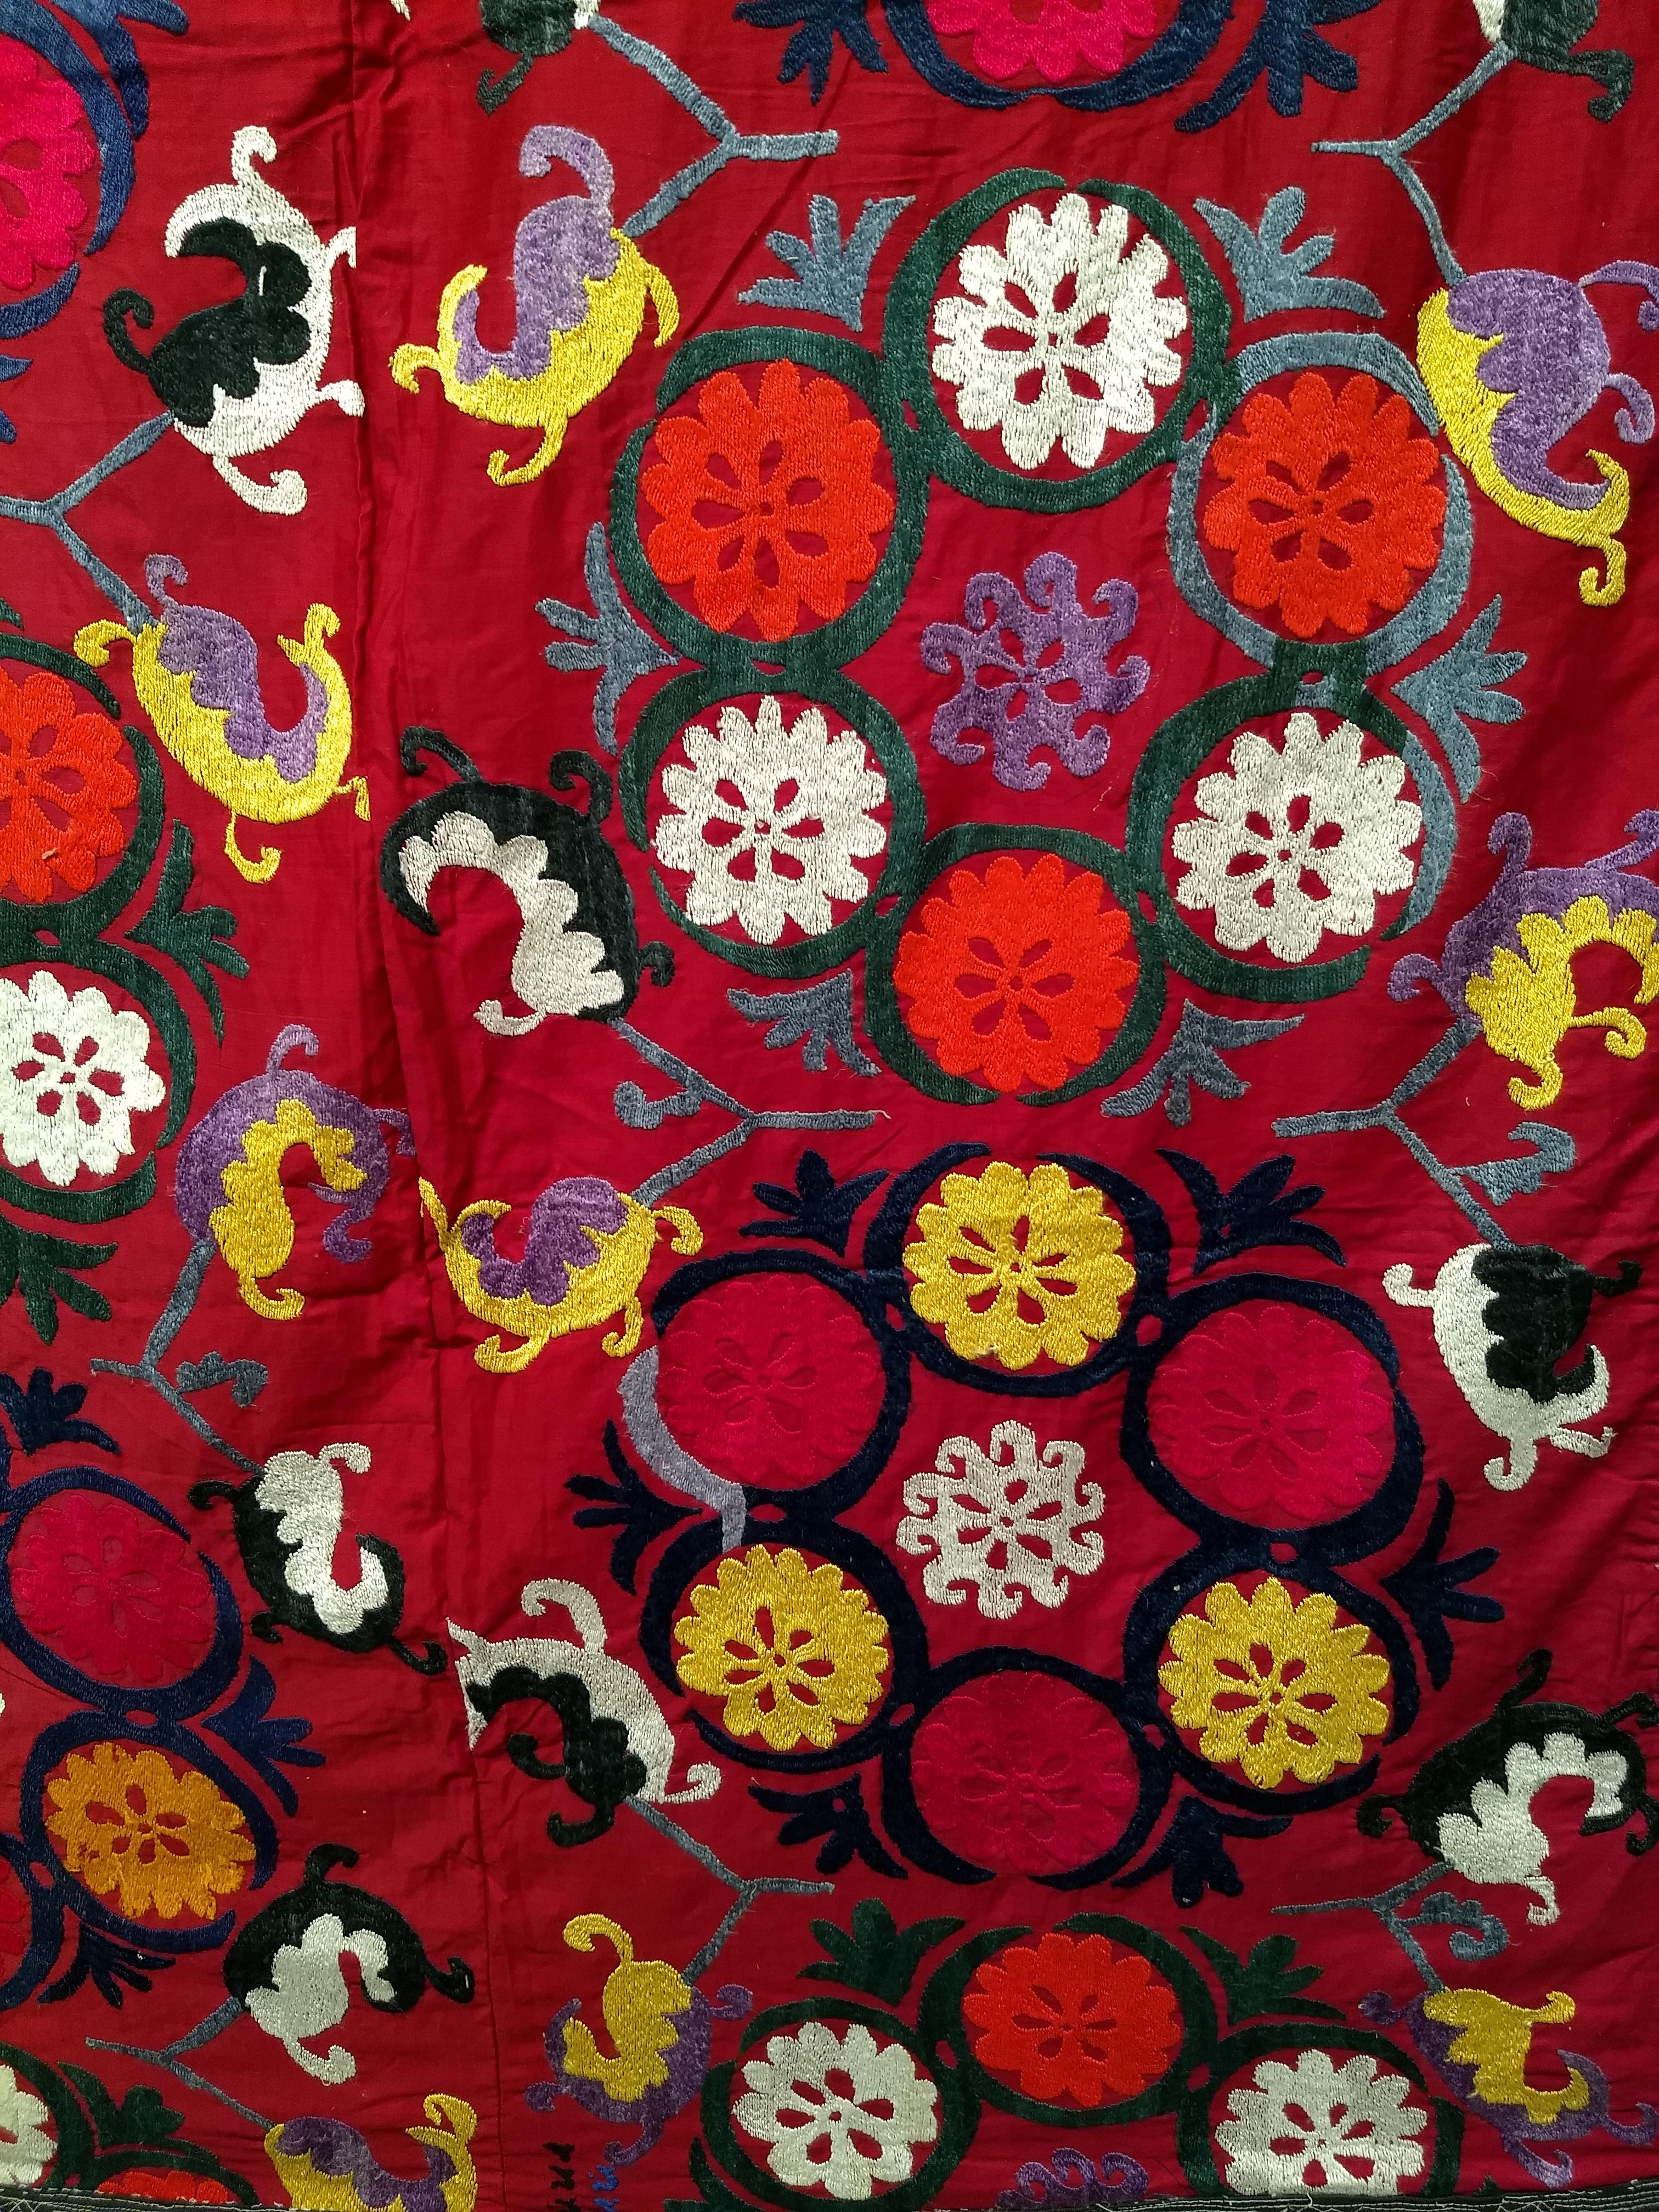 Vintage Uzbek Suzani Silk Embroidery in Red, Ivory, Blue, Yellow, Black, Purple For Sale 2